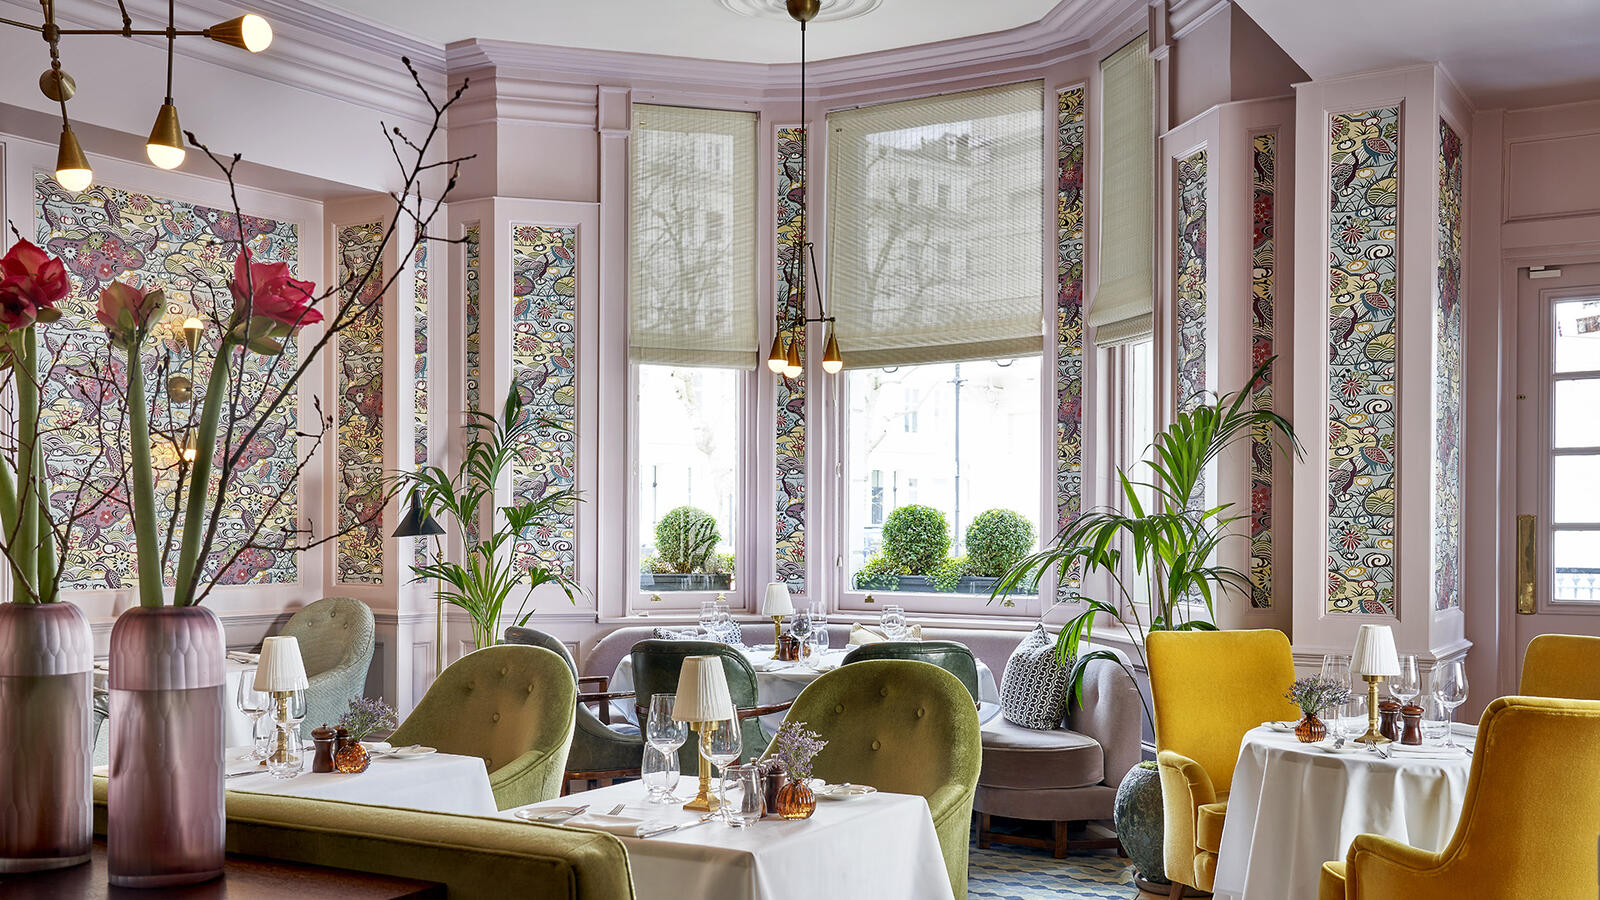 The Town House Restaurant at The Kensington Hotel boasts a vibrant regency elegance. The restaurant's interior features a classic style with pops of color.